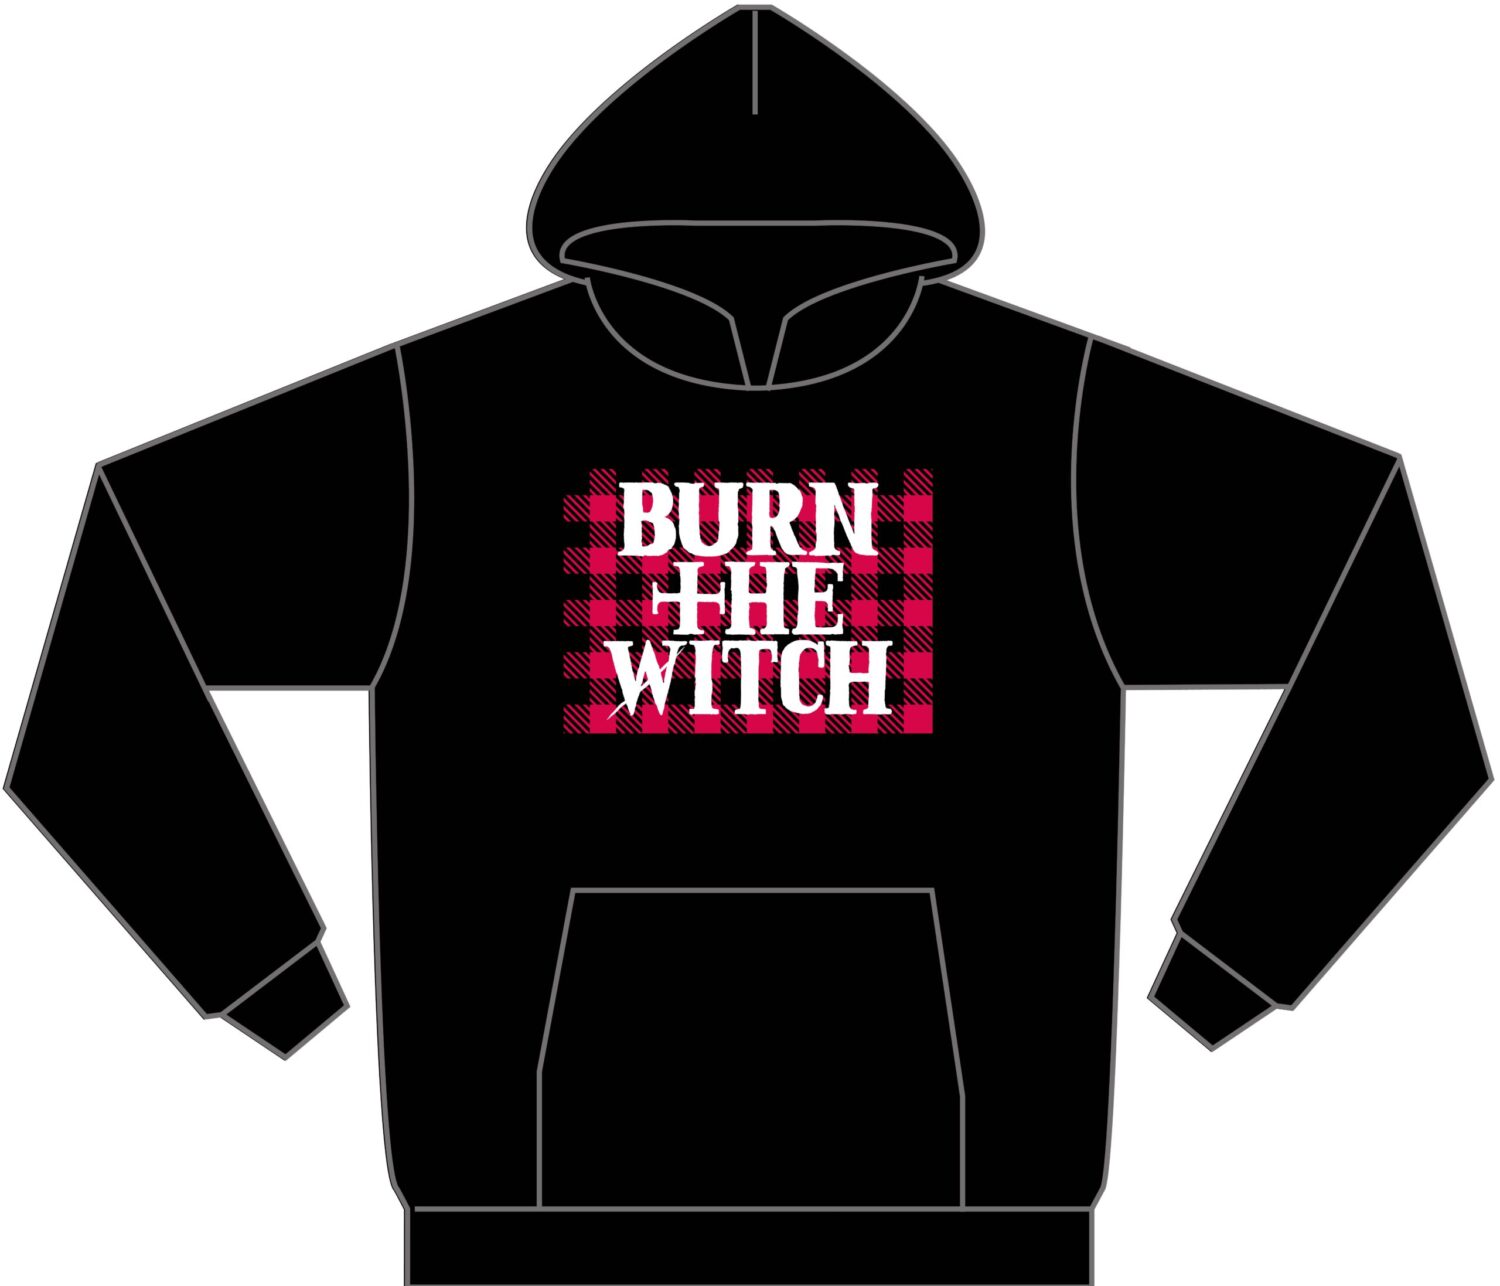 Burn The Witch プリントパーカー アニメ Burn The Witch 公式サイト